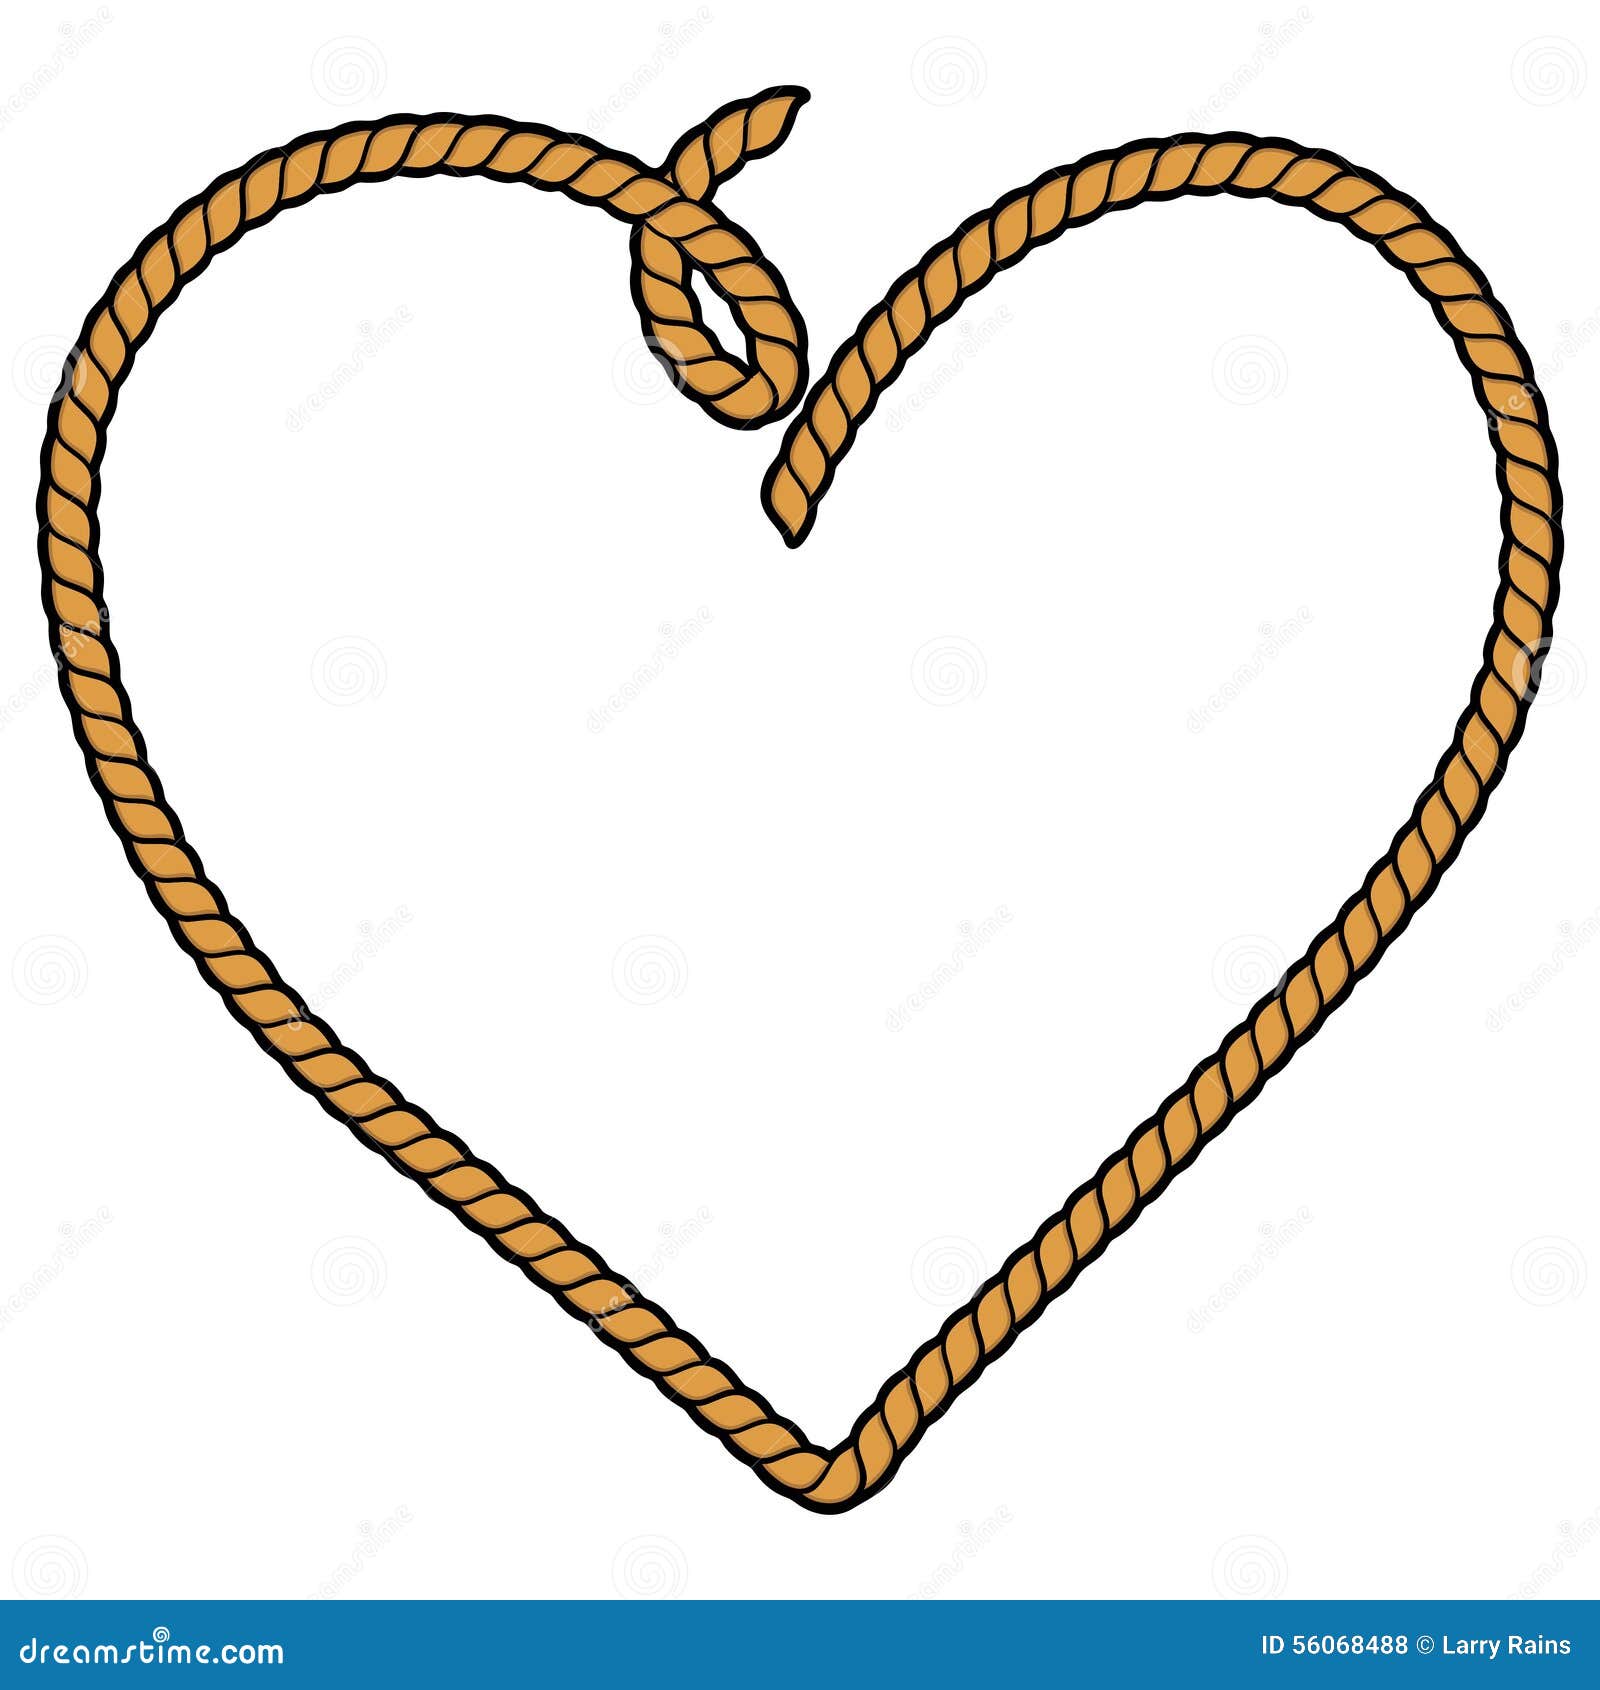 Rope Heart stock vector. Illustration of cowboy, element ...